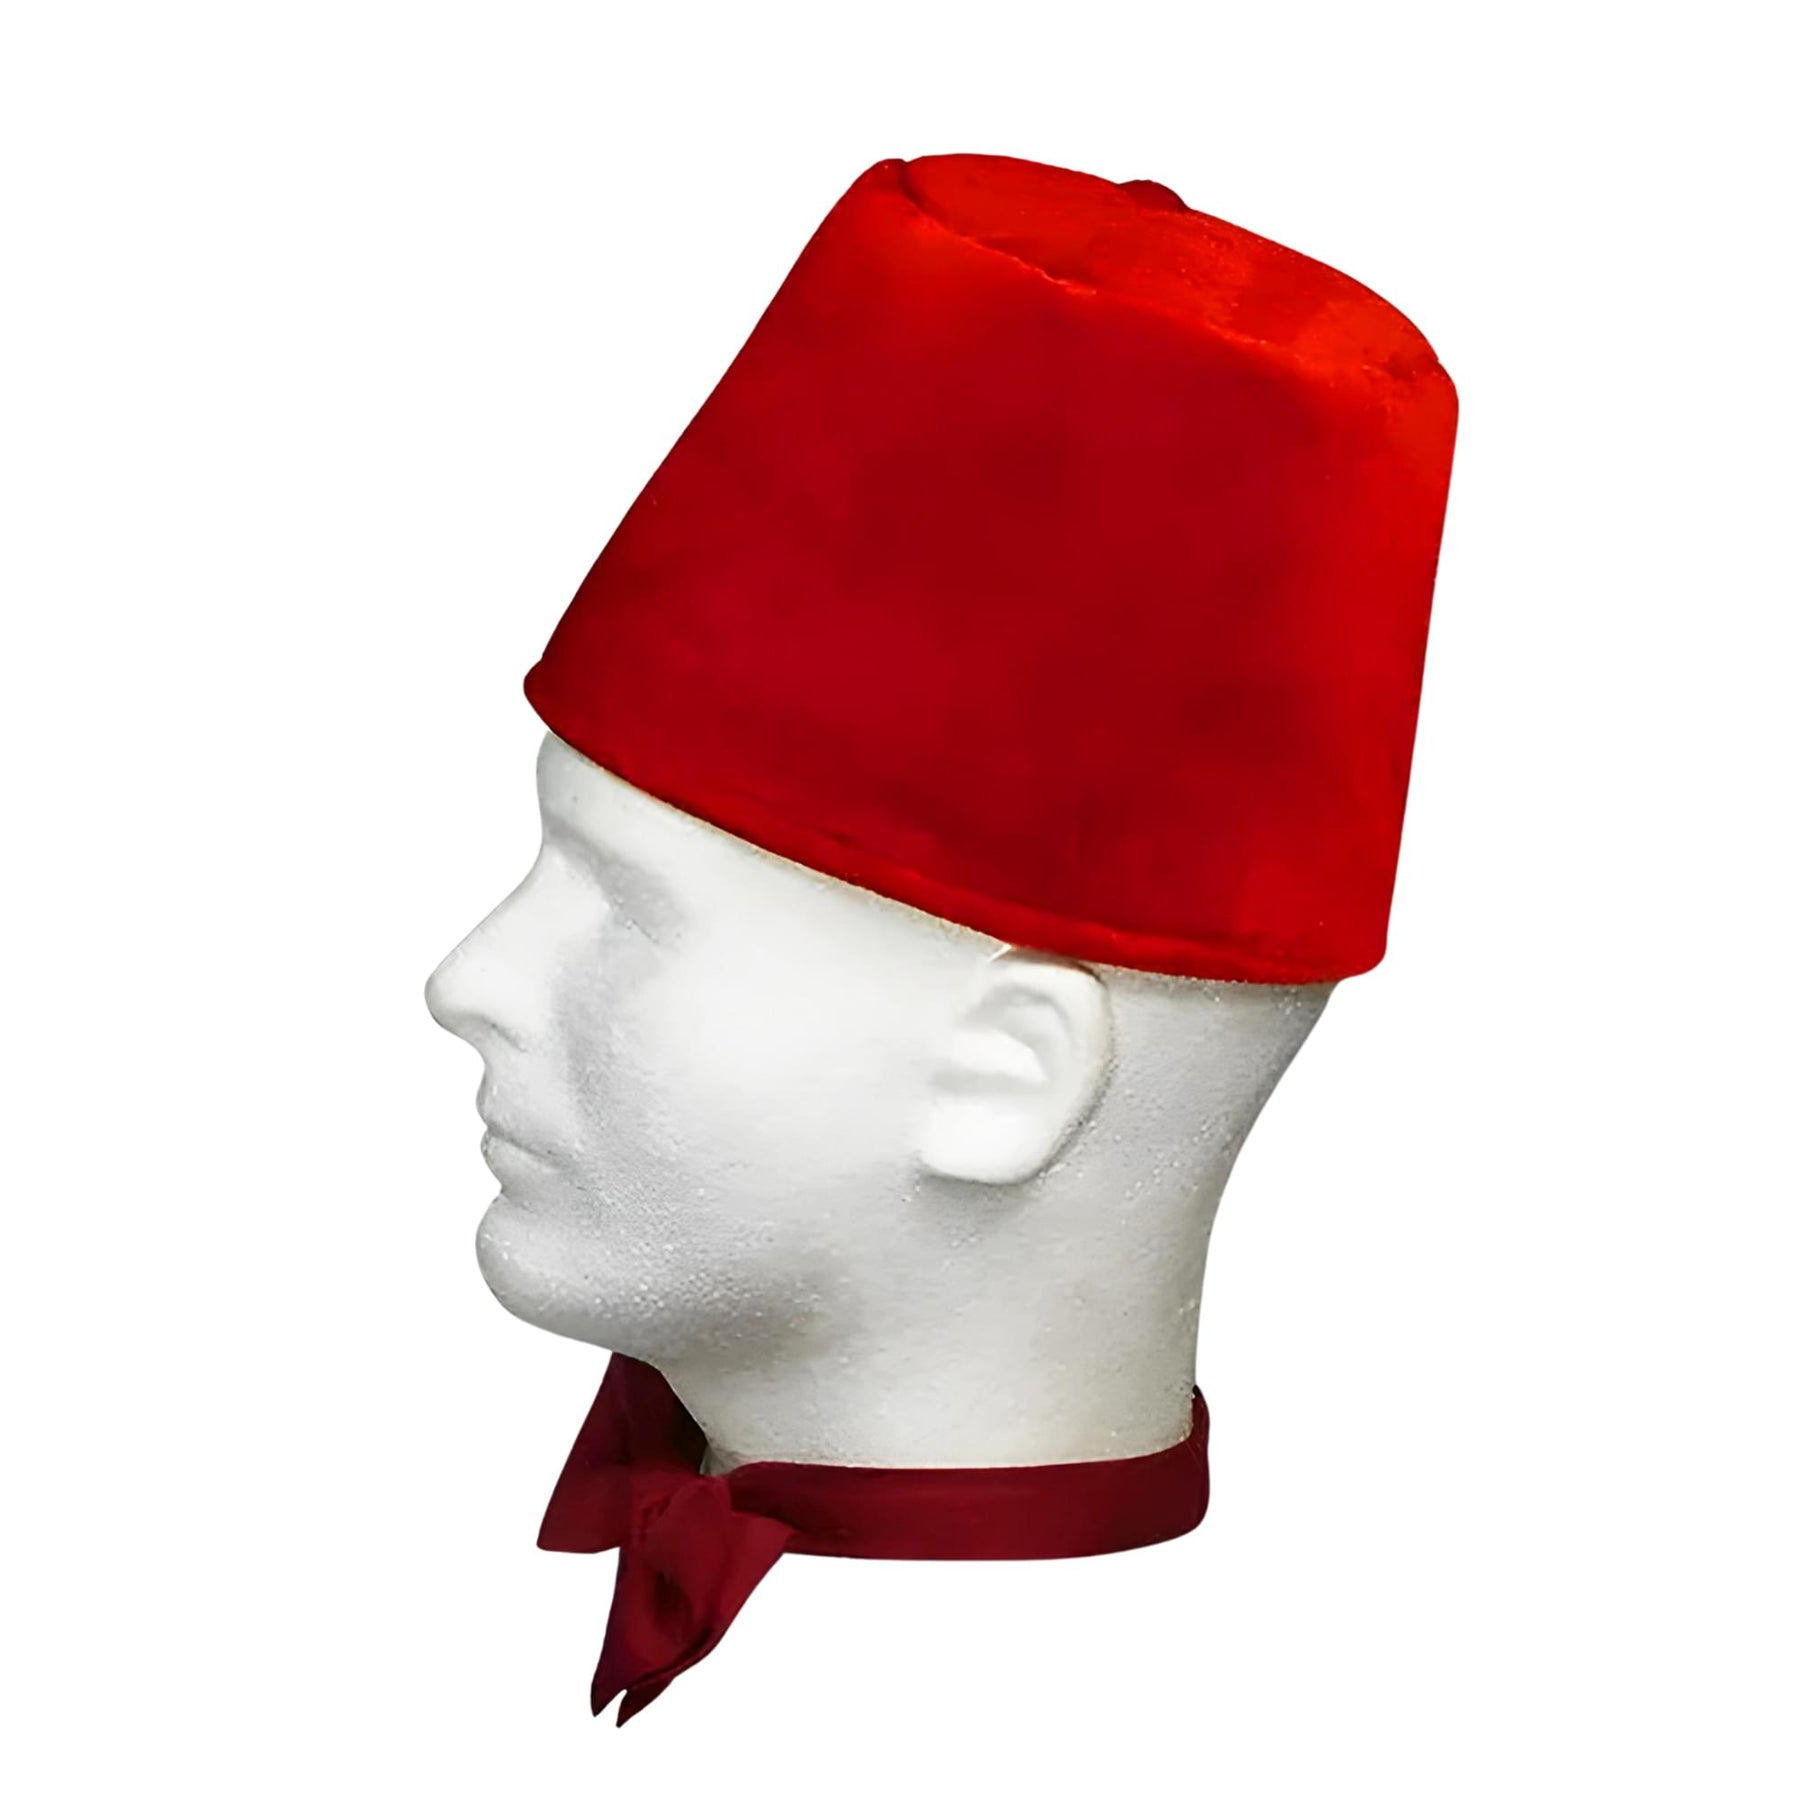 Dr. Who Fez Bowtie Officially Licensed Costume Set